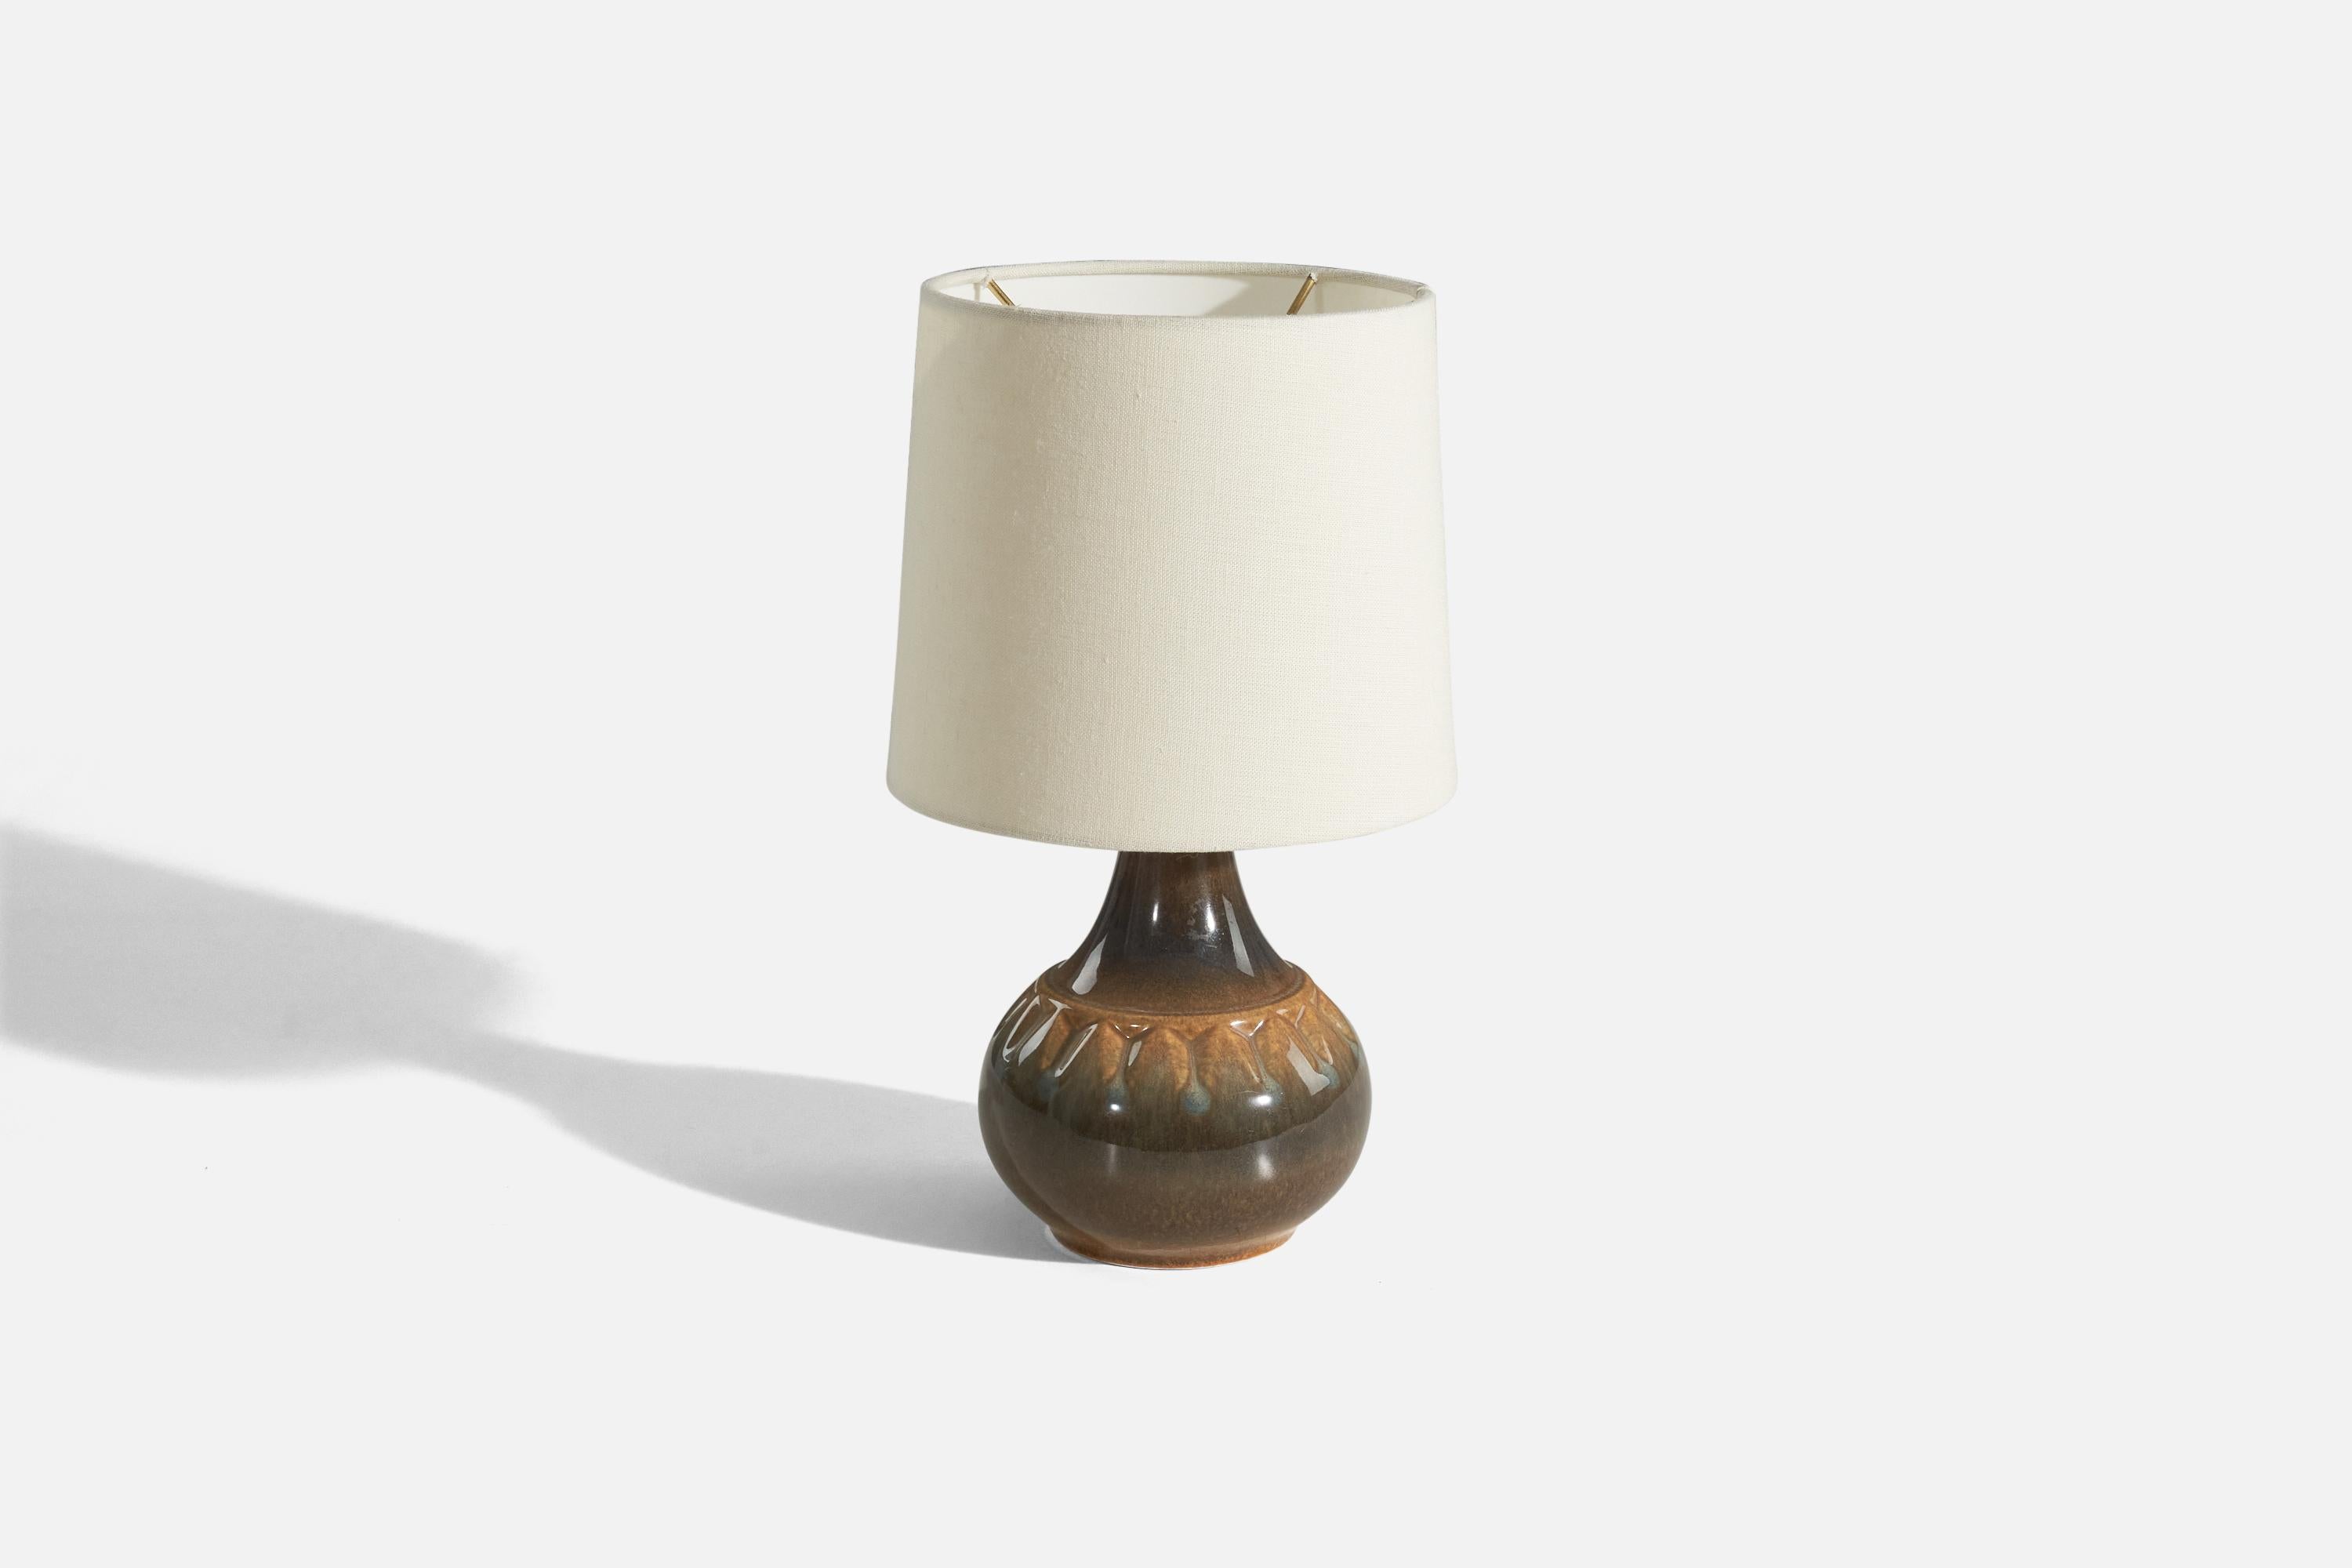 A pair of brown-glazed stoneware table lamps designed and produced by Søholm Stentøj, Denmark, 1970s.

Sold without lampshades. 
Dimensions of lamp (inches) : 9.43 x 5.87 x 5.87 (Height x Width x Depth)
Dimensions of shade (inches) : 7 x 8 x 7